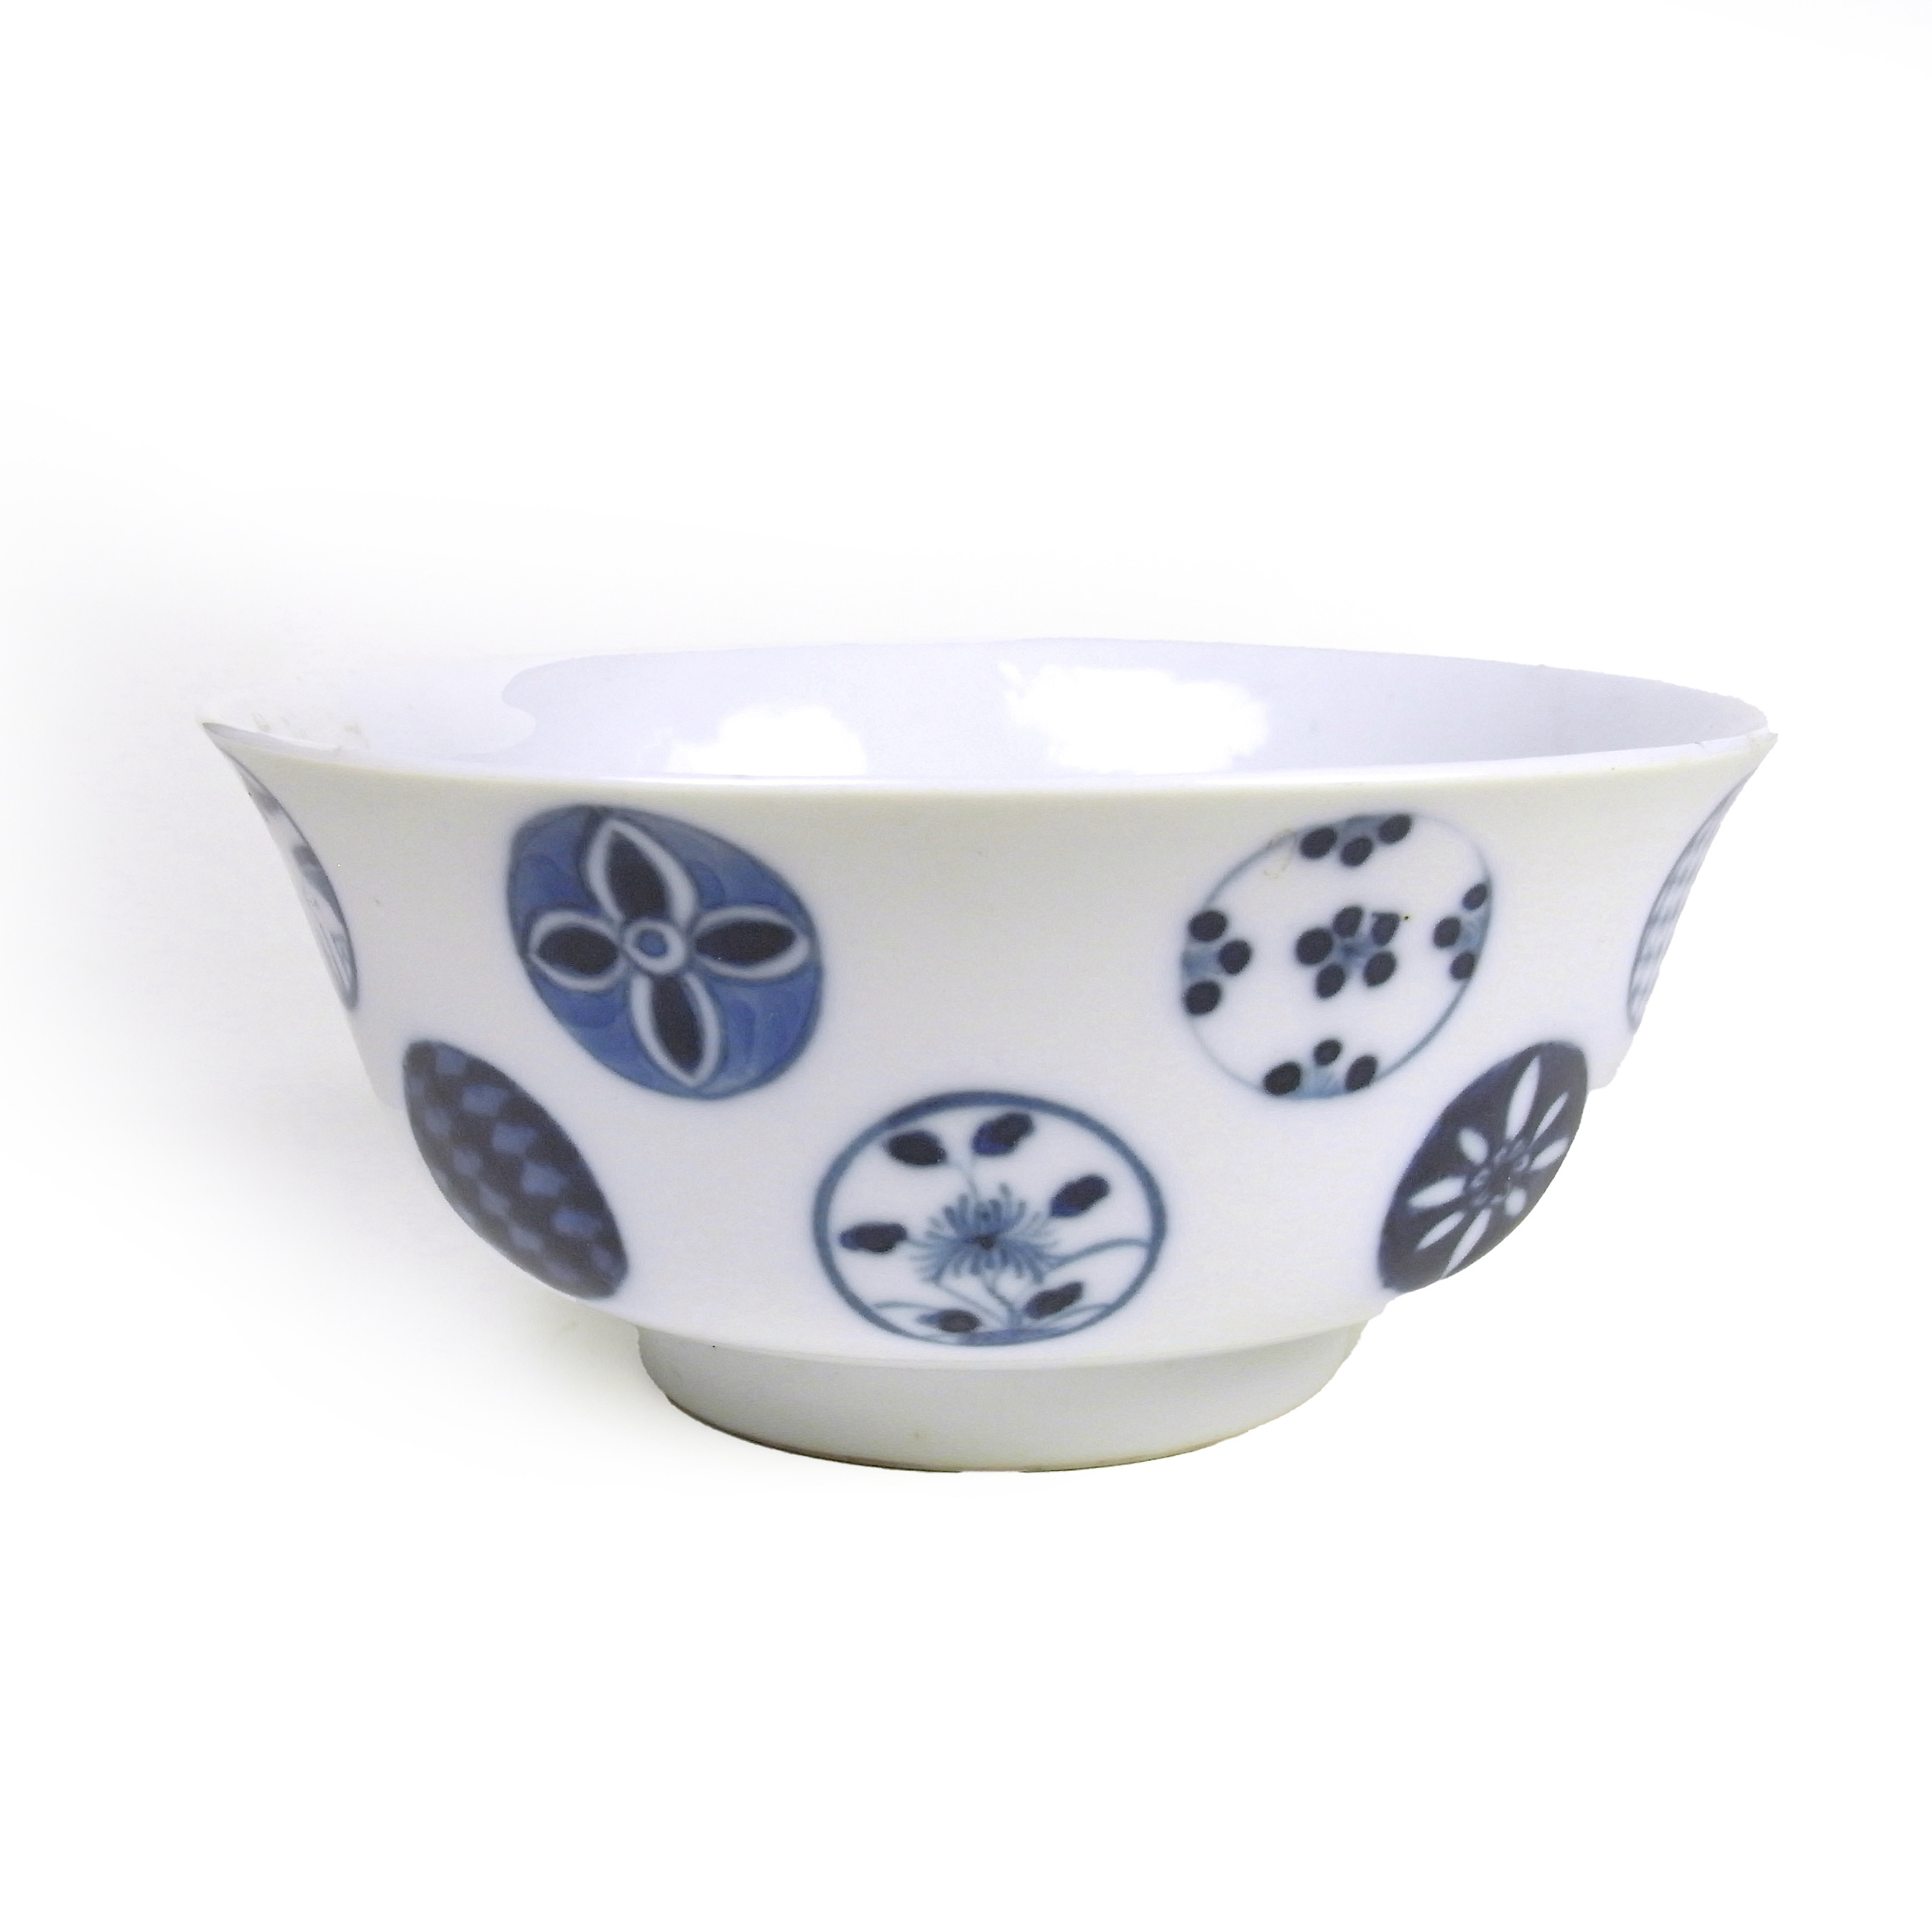 A Chinese blue and white porcelain bowl, probably 19th century